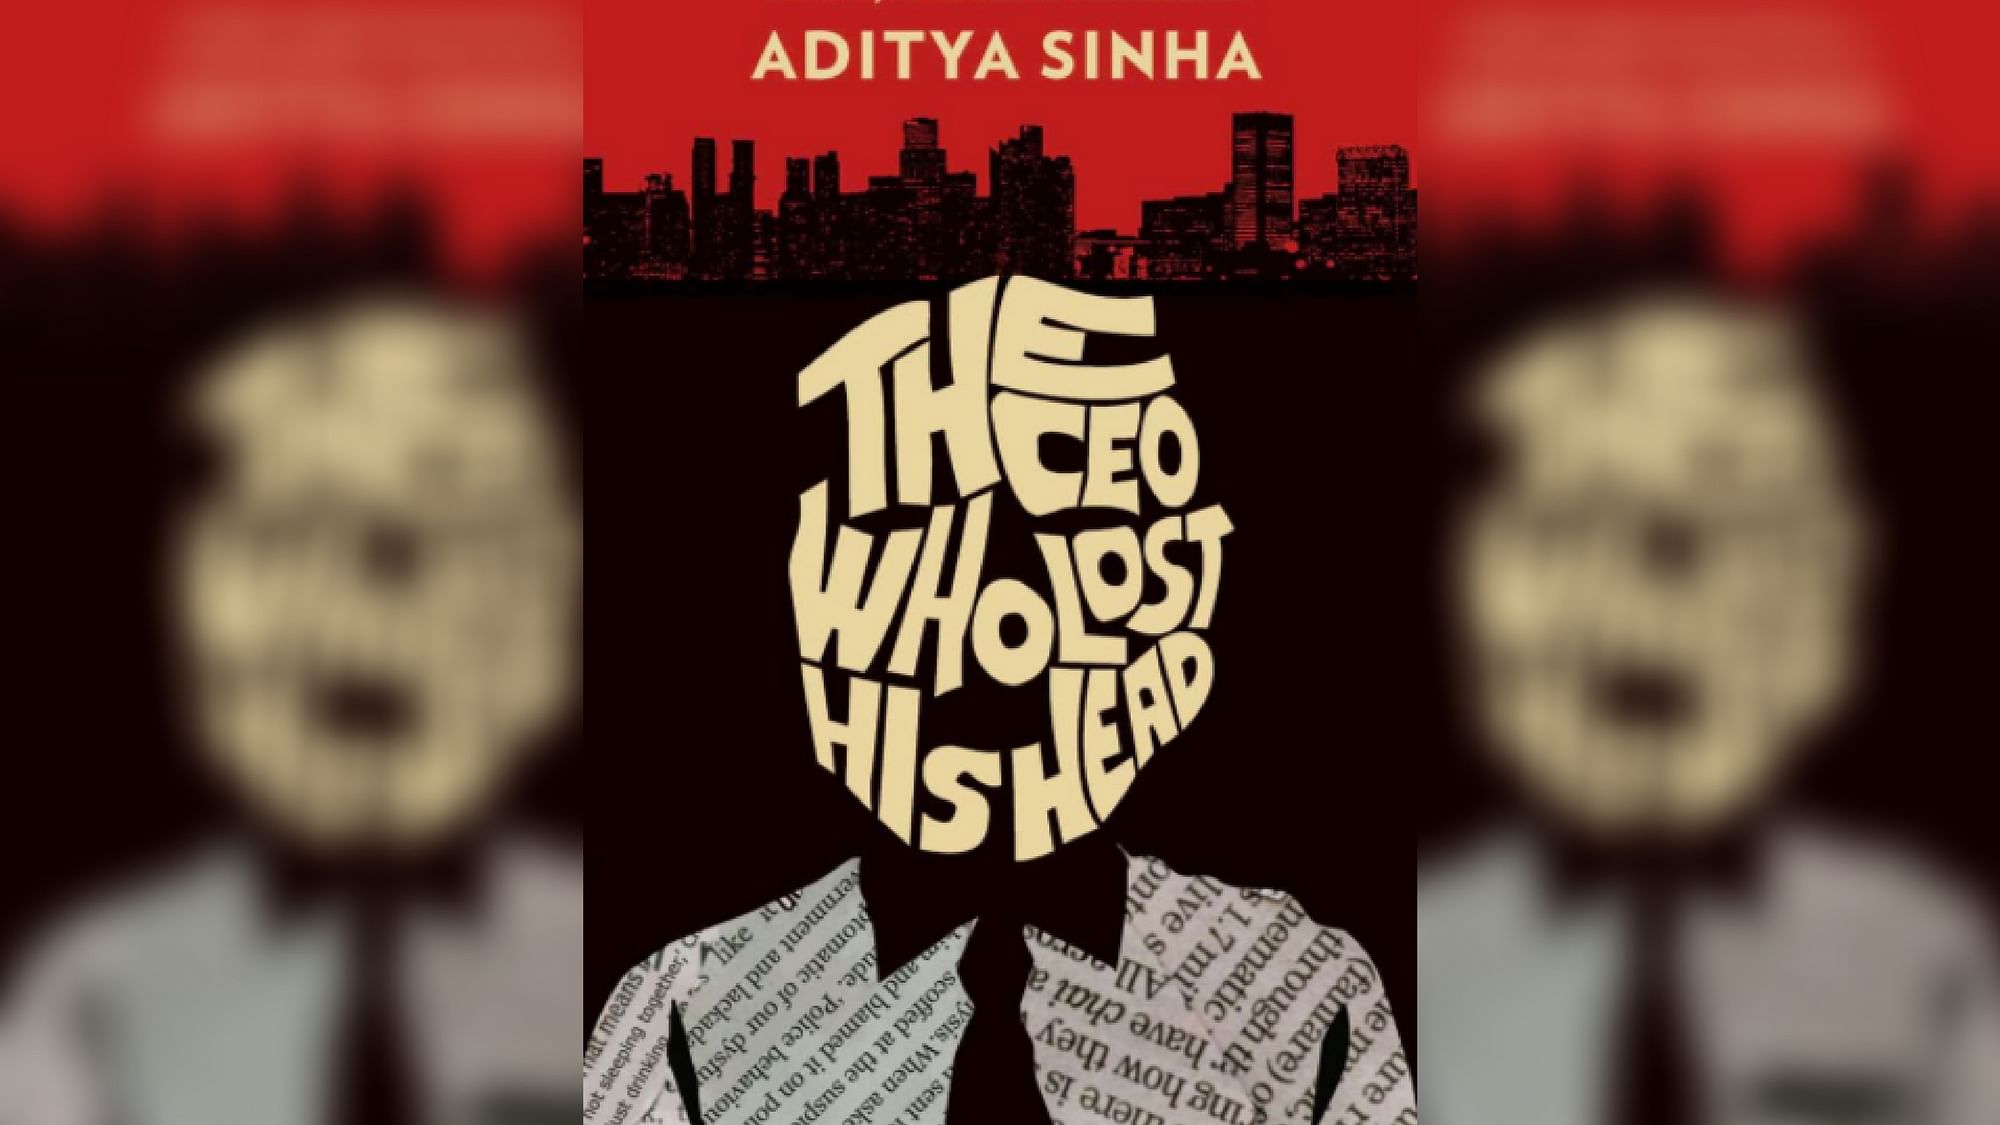 Aditya Sinha believes crime fiction in India is yet to hit the big league. (Photo Courtesy: Amazon.in; Image Altered by <b>The Quint</b>)